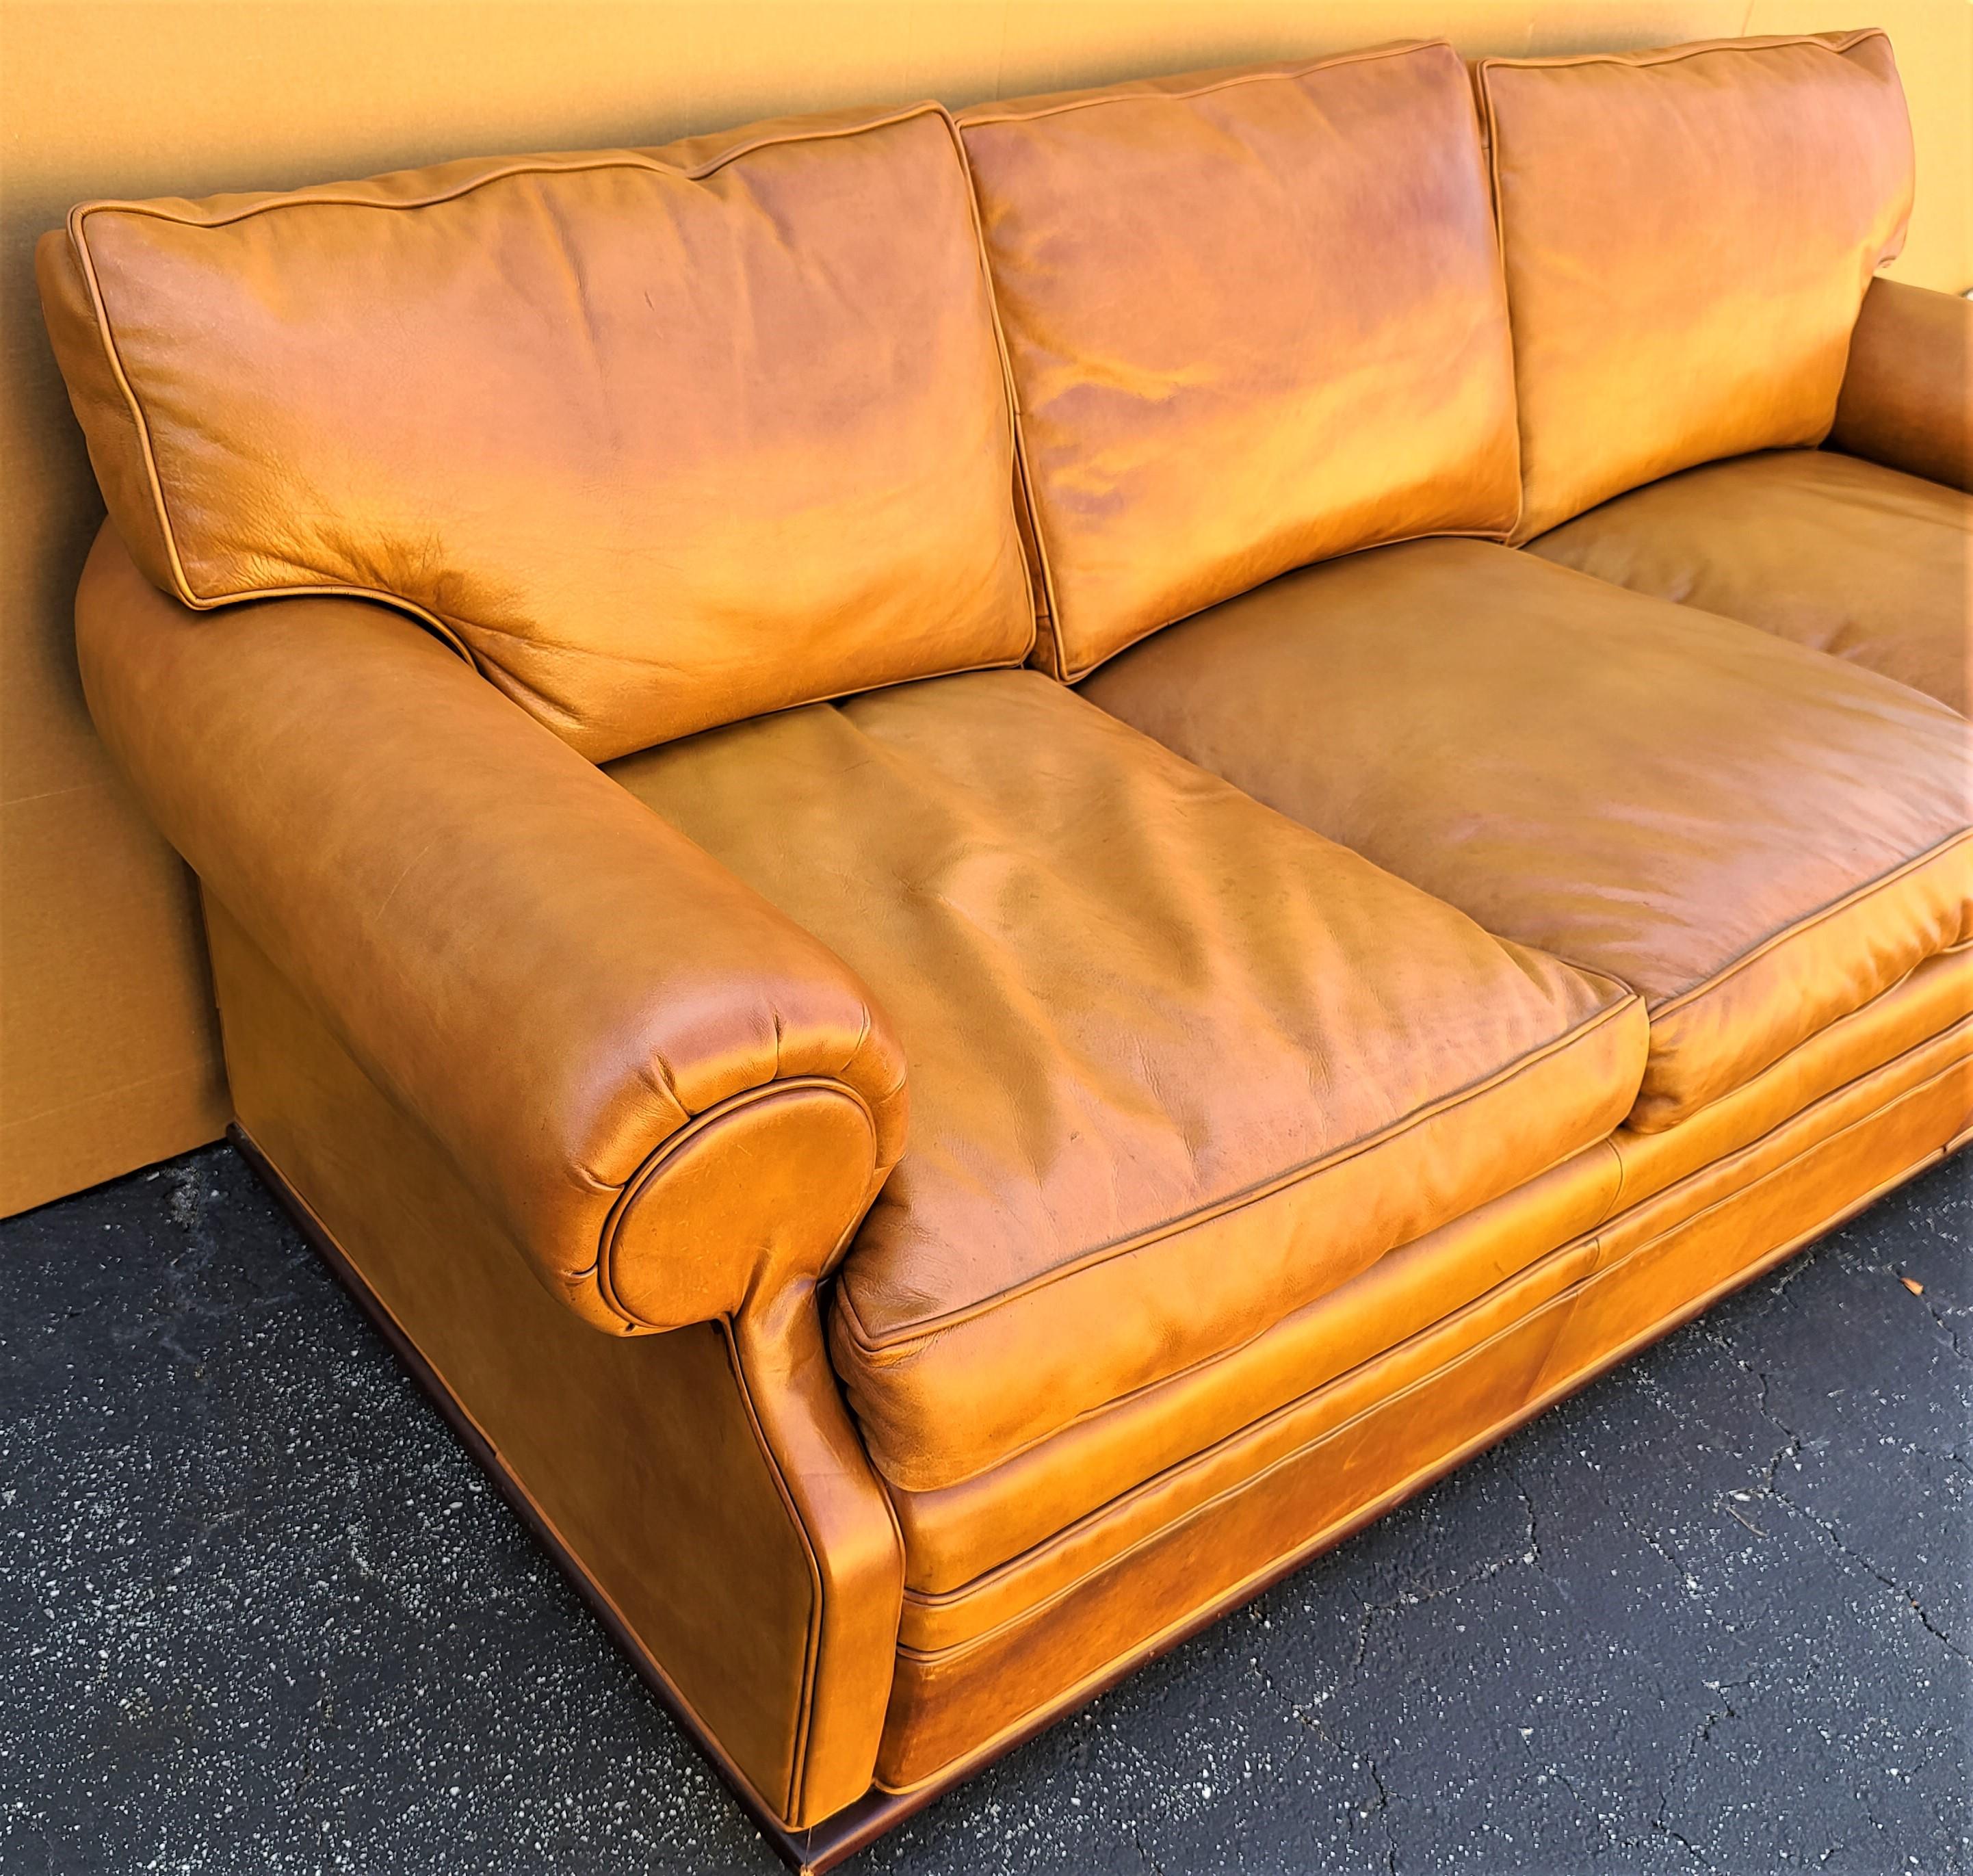 Offering one of our recent Palm Beach Estate fine furniture acquisitions of a
Gorgeous vintage Ralph Lauren caramel brown leather sofa with a classic roll arm shape and raised wood base with round feet. 
The wood base goes around the entire